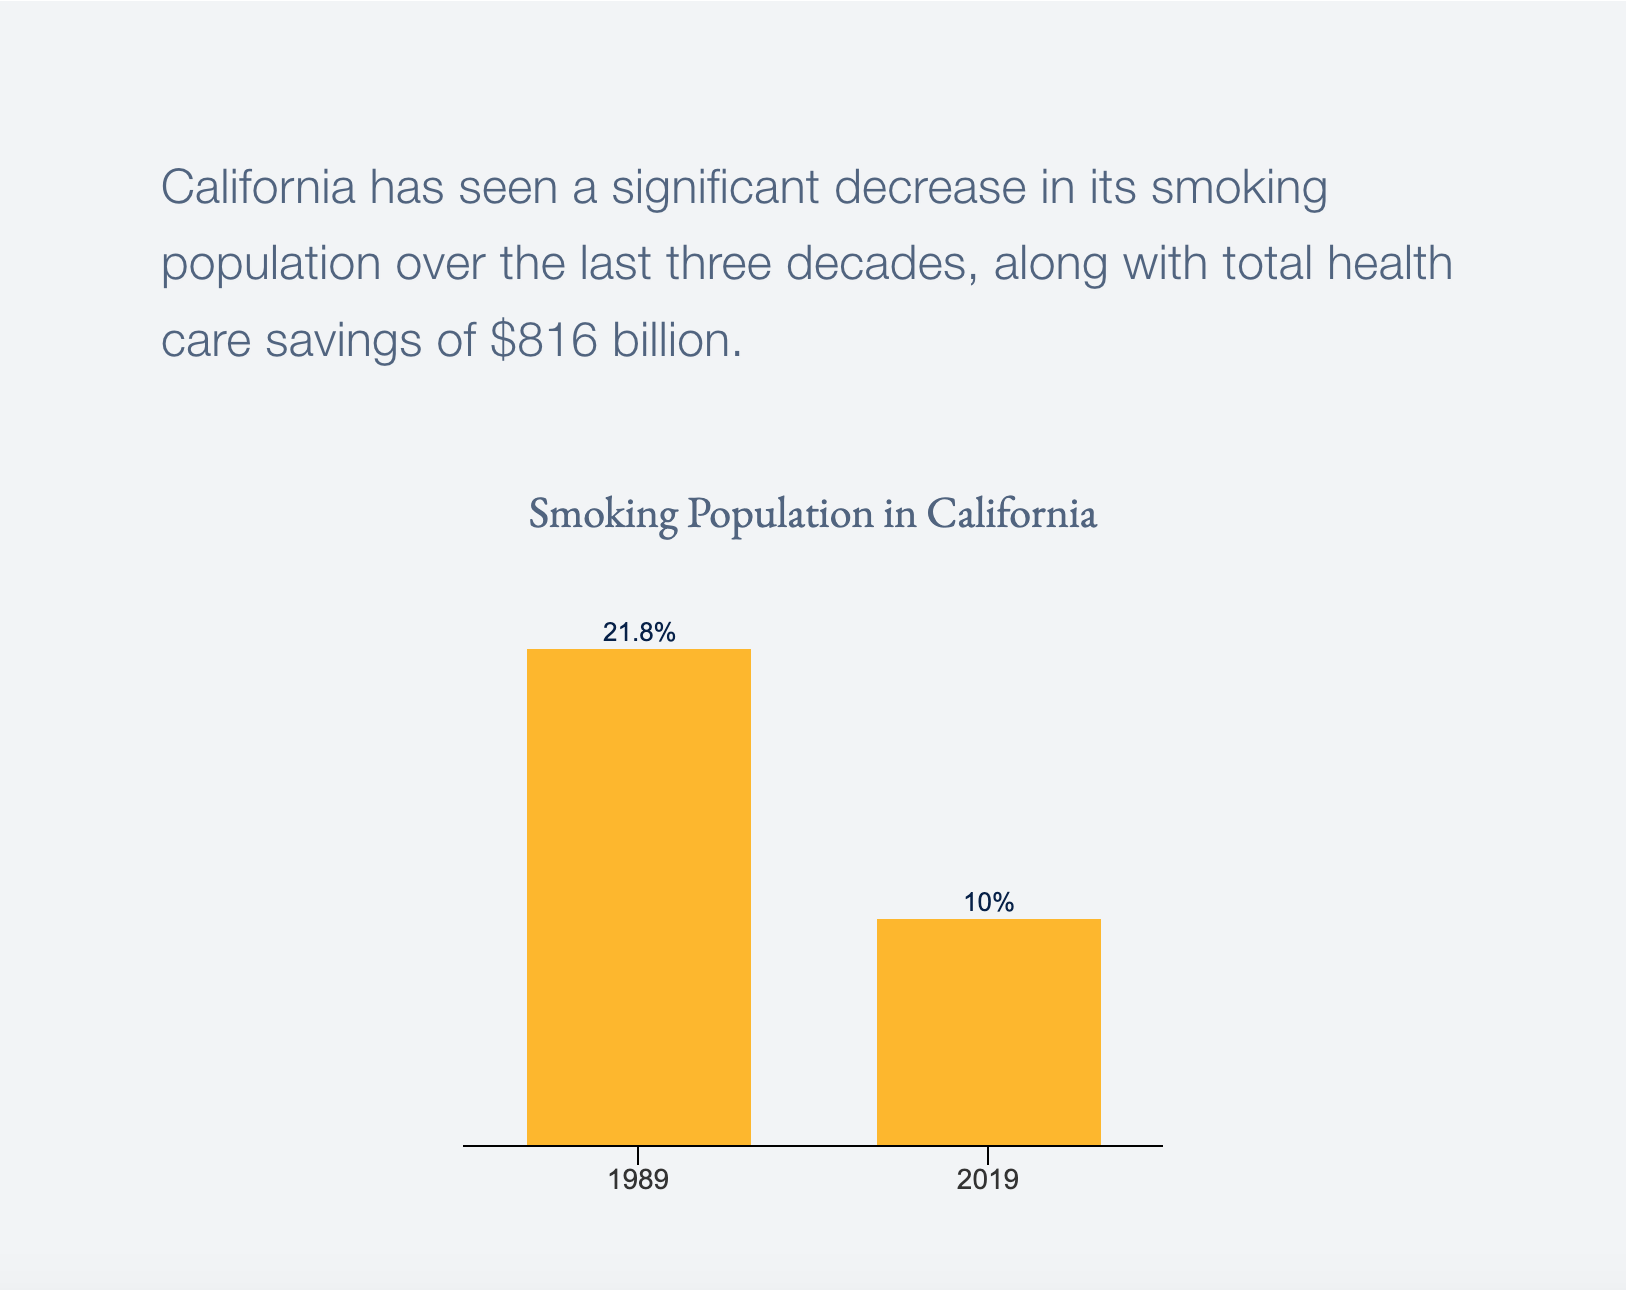 Bar graph comparing California's smoking population, from 1989 to 2019